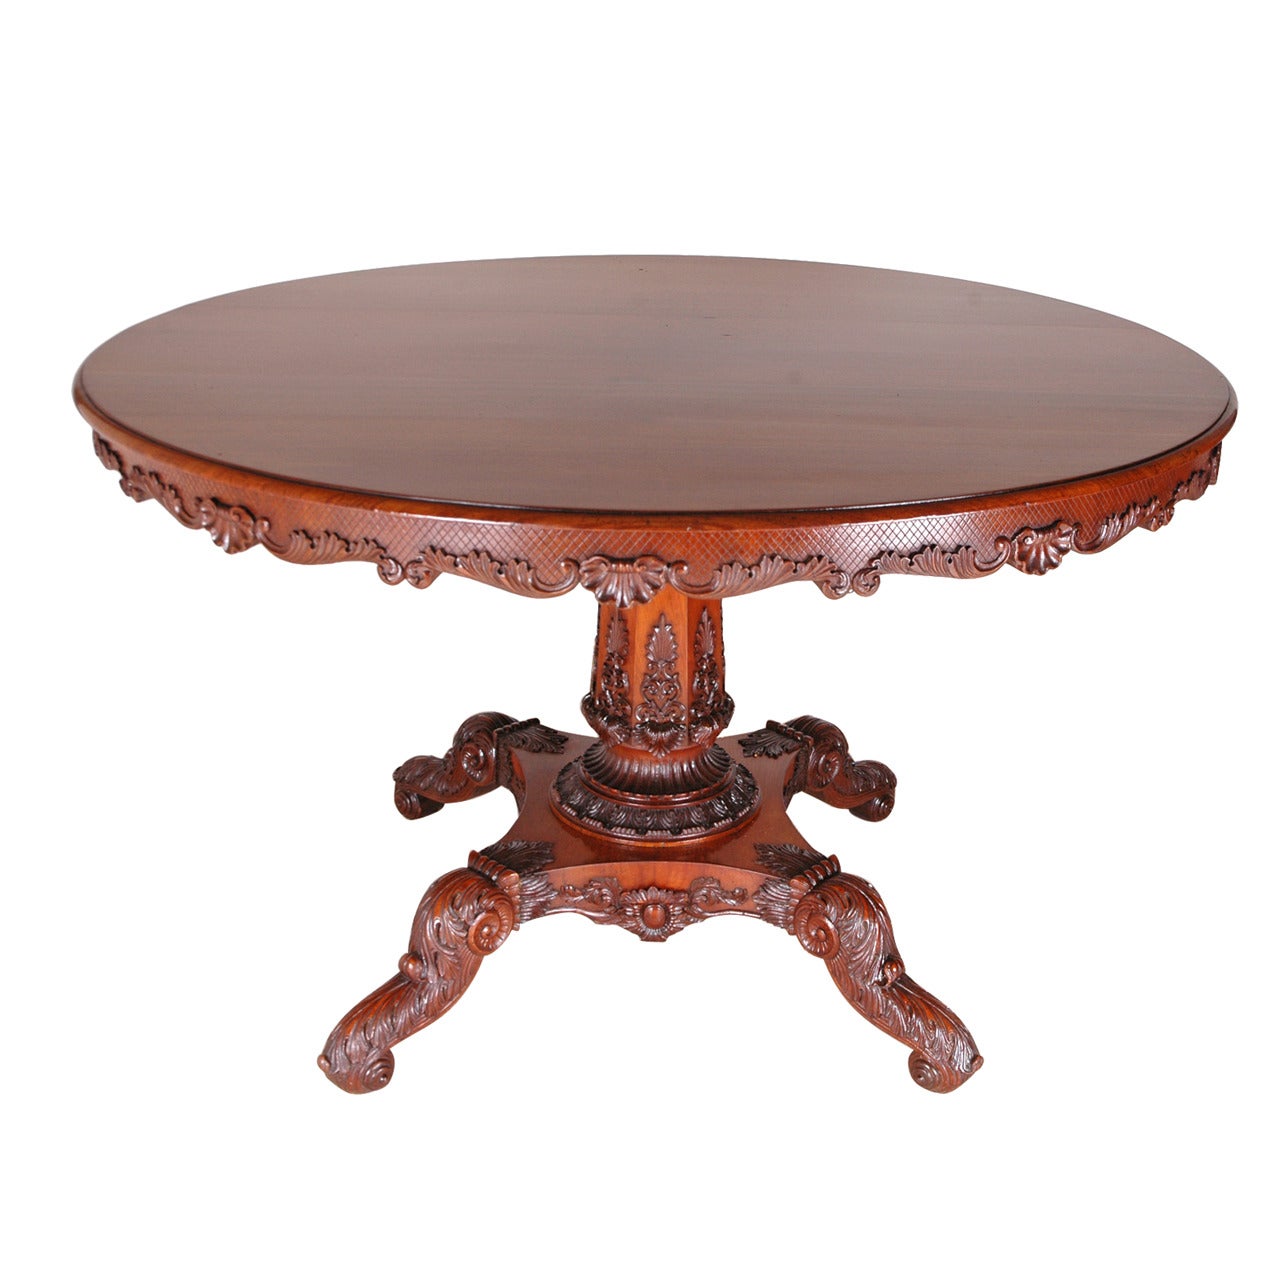  48" Round English Regency Dining Table in Mahogany with Carved Center Pedestal